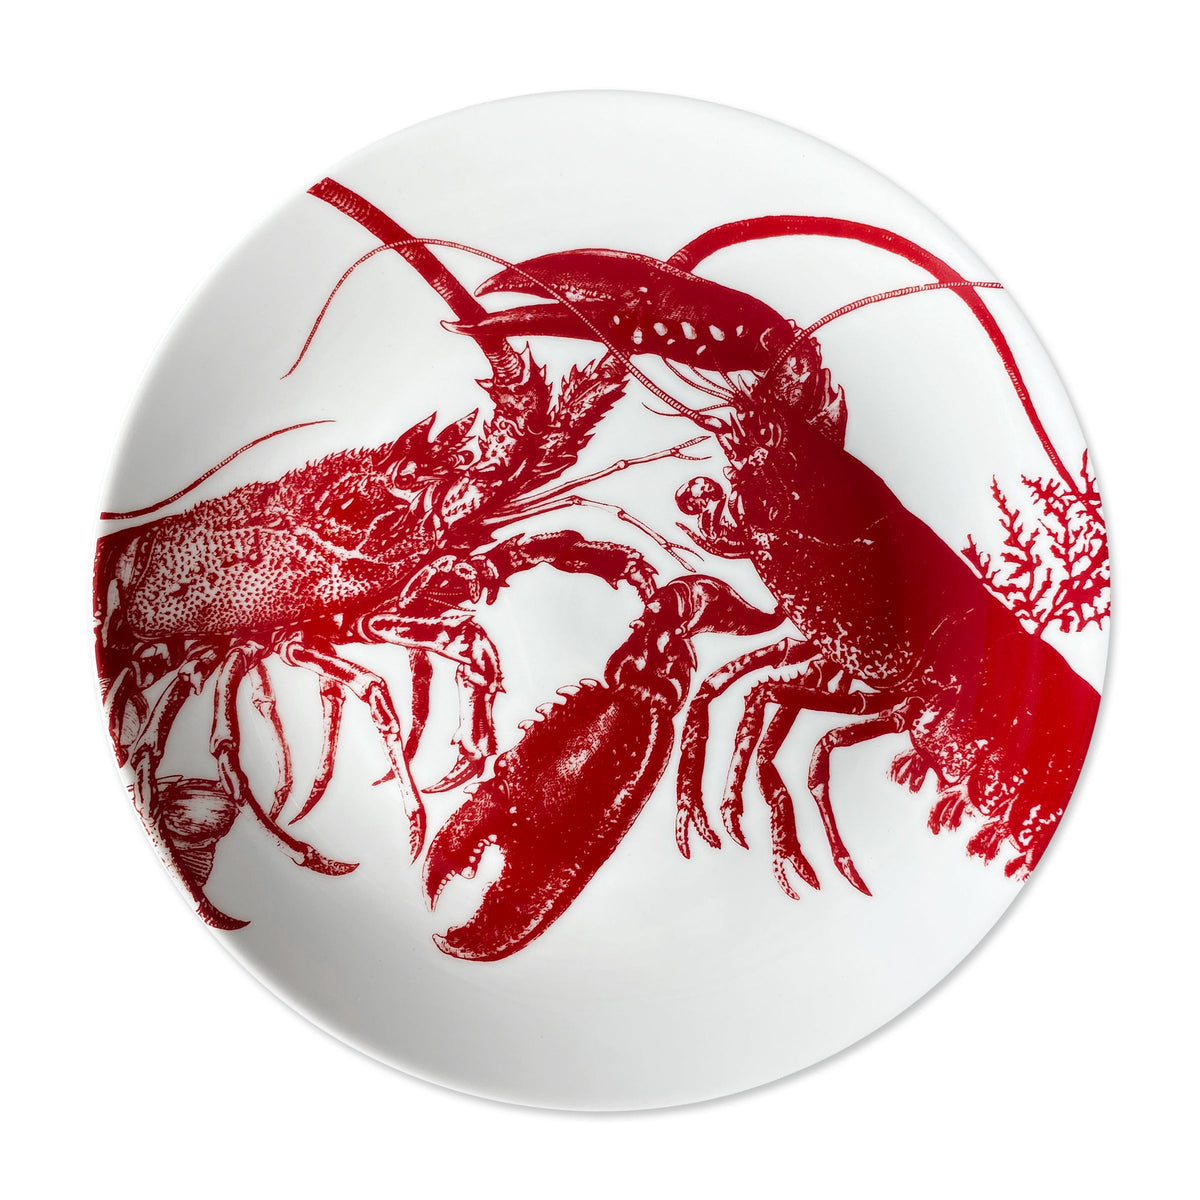 A summer-ready white plate with a red lobster on it, perfect for the Caskata Lobster Starter Set.